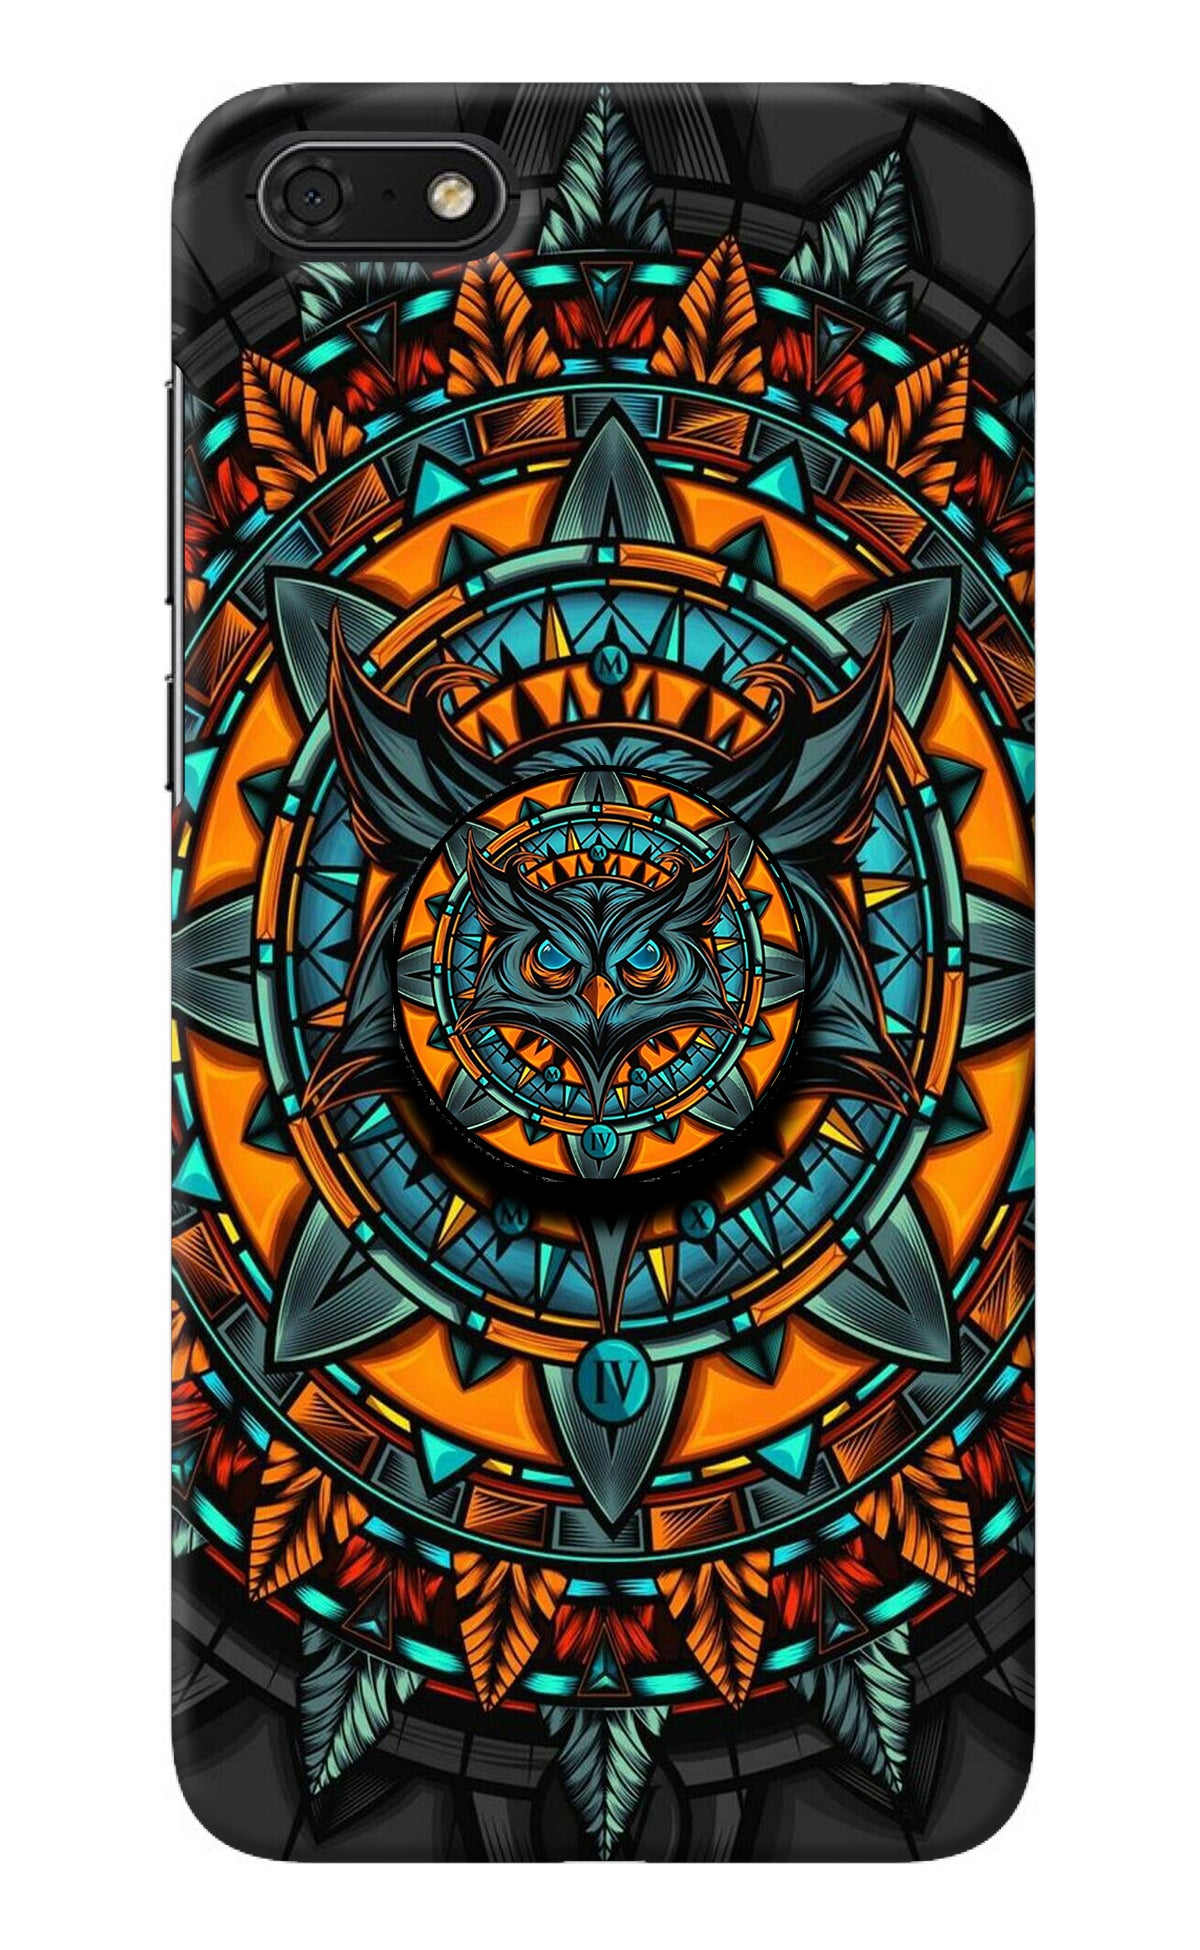 Angry Owl Honor 7S Pop Case